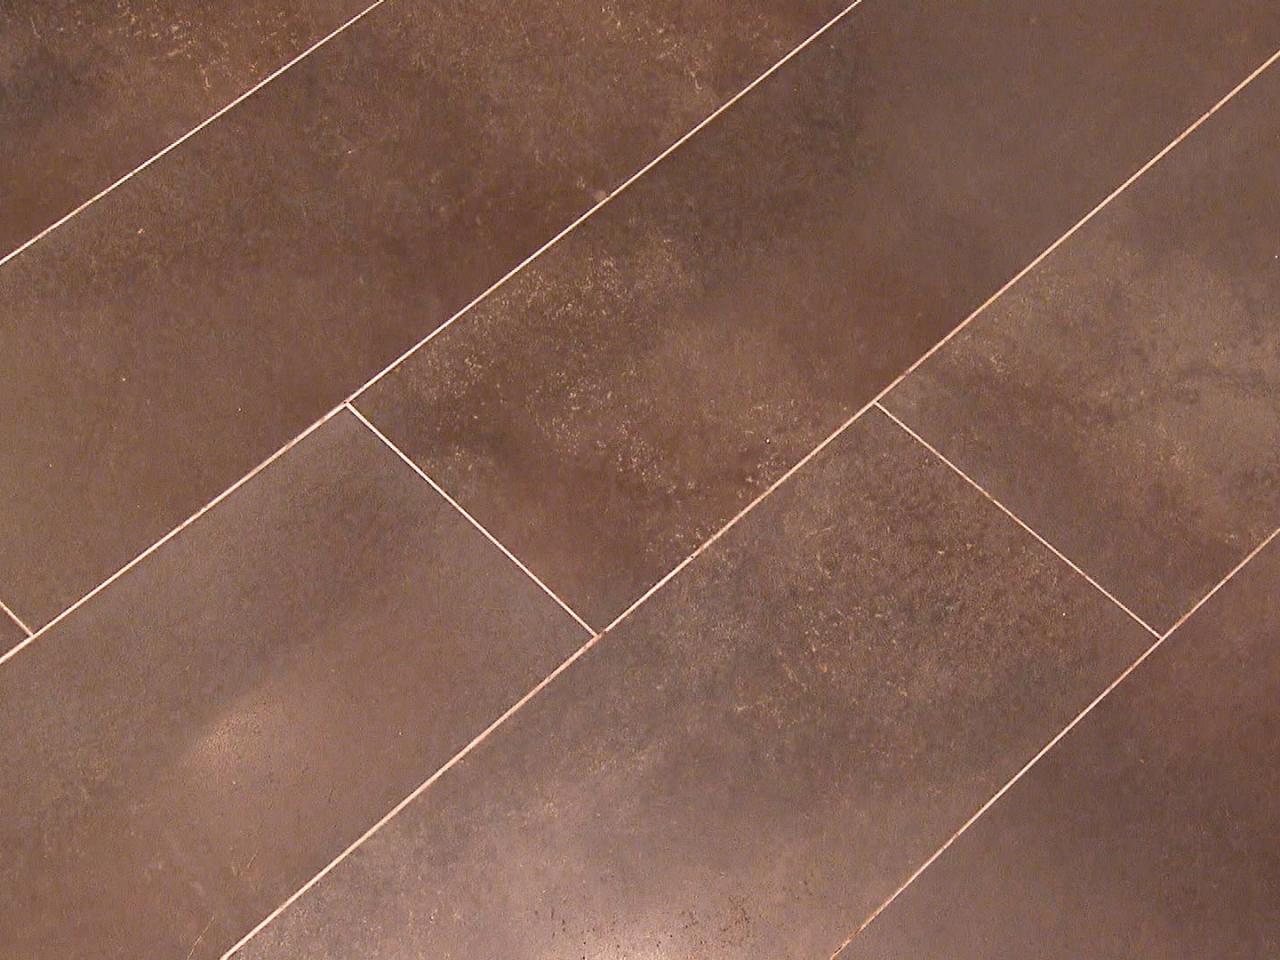 How To Install A Plank Tile Floor, Square Or Rectangle Floor Tiles For Kitchen